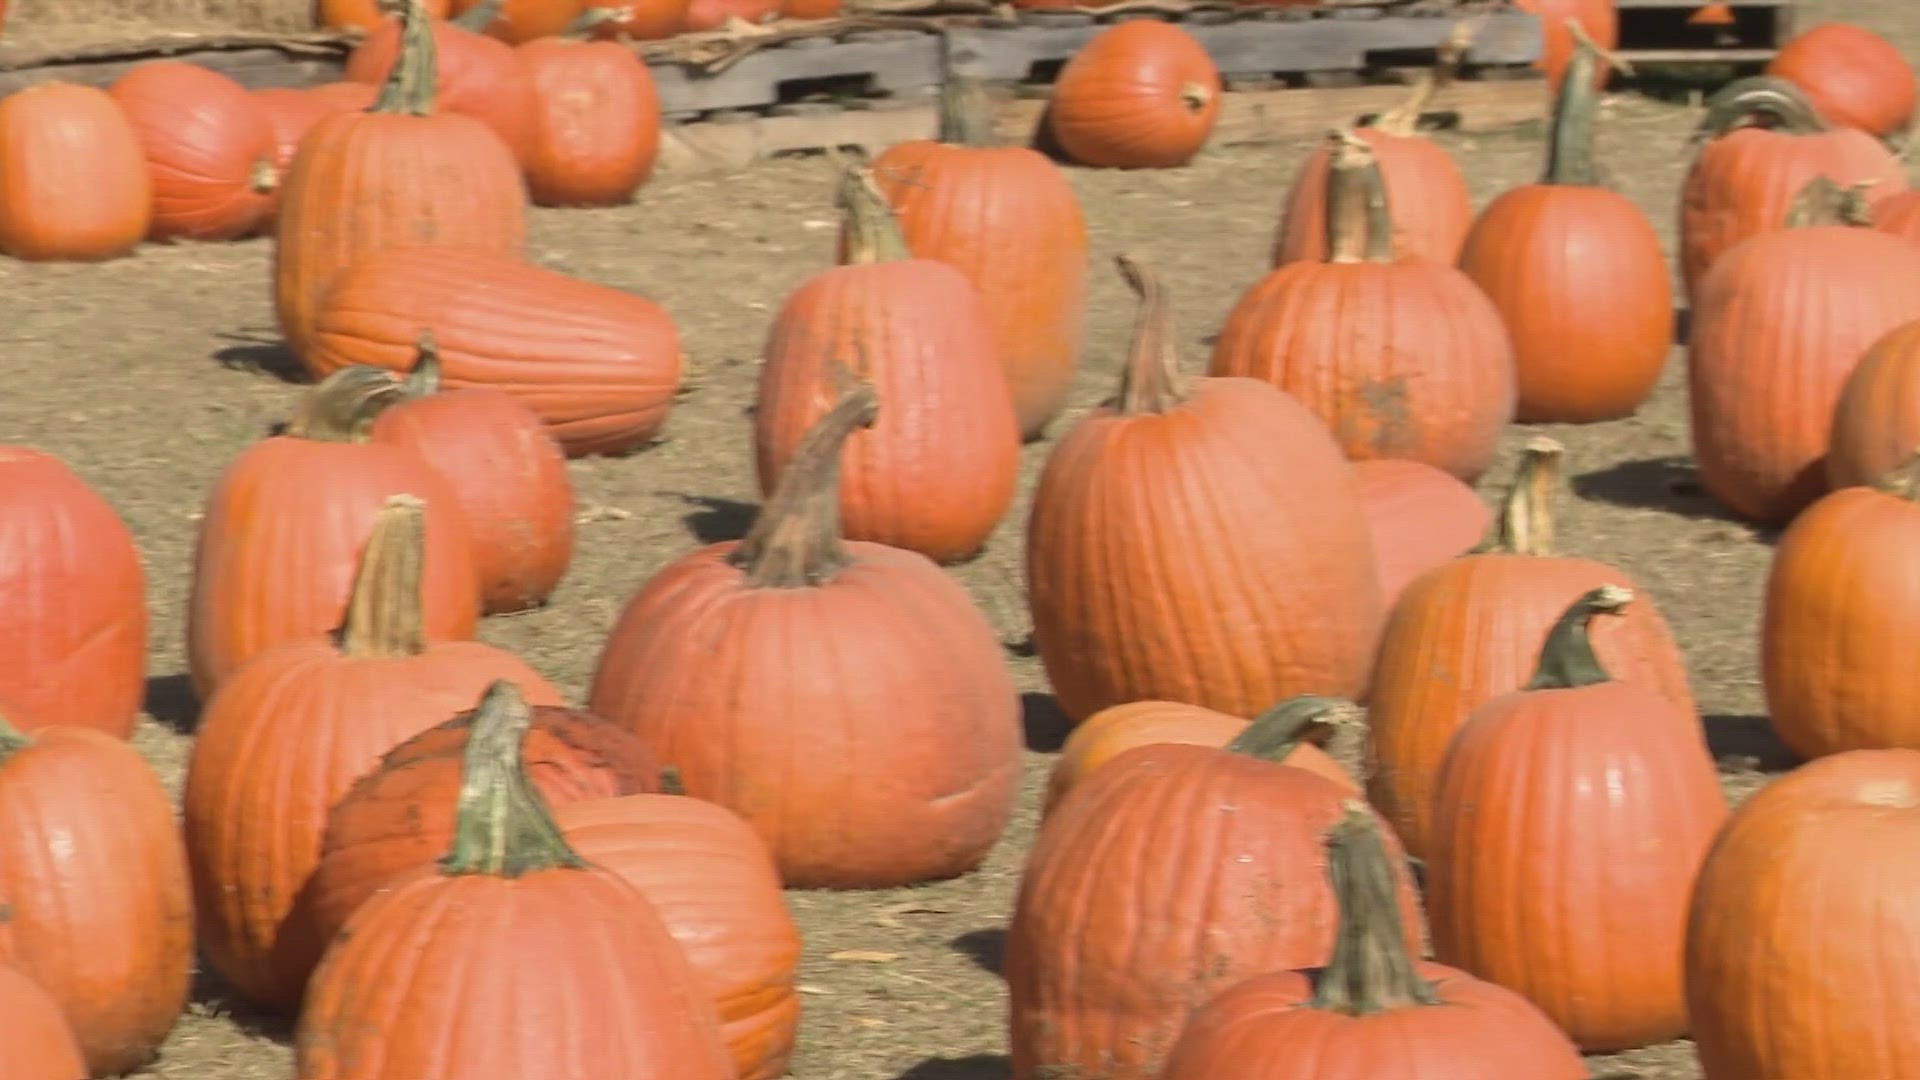 Meteorologist Chita Craft checked the pumpkins out at Dewberry Farms.